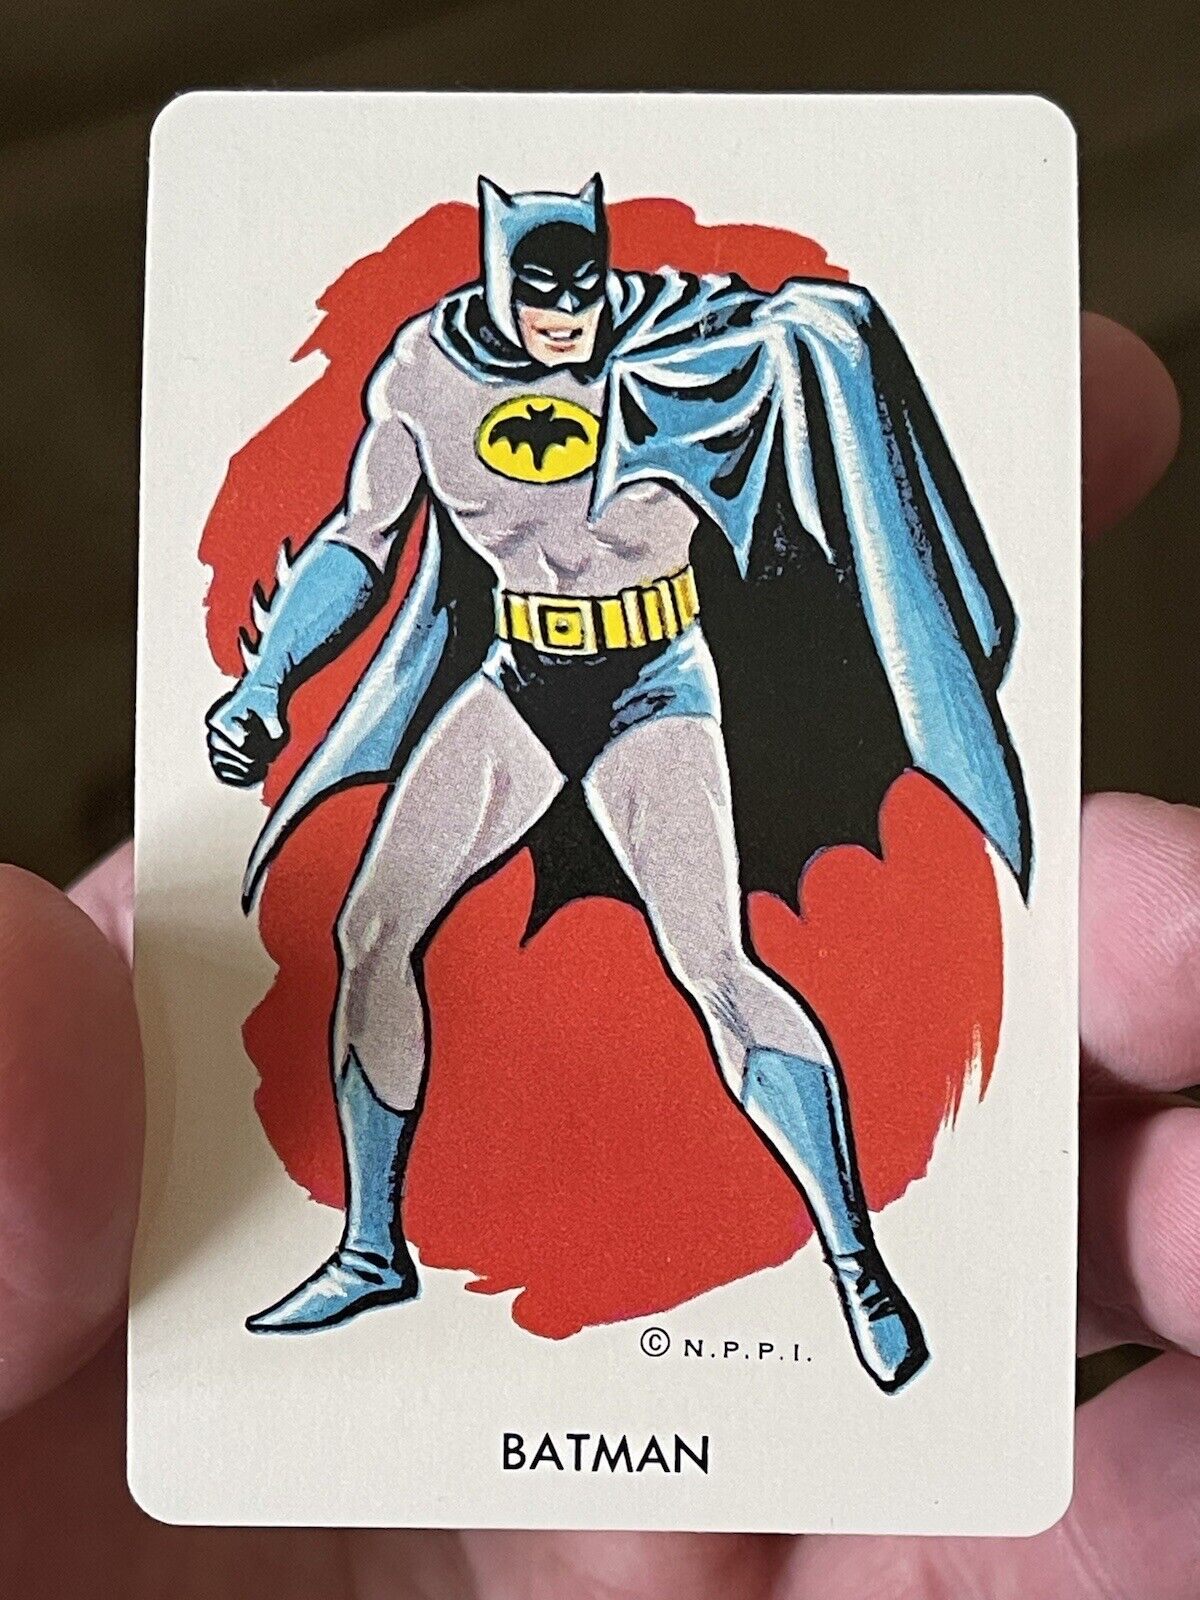 EXTREMELY RARE VINTAGE 1966 BATMAN ROOKIE YEAR PLAYING CARD GAME RC